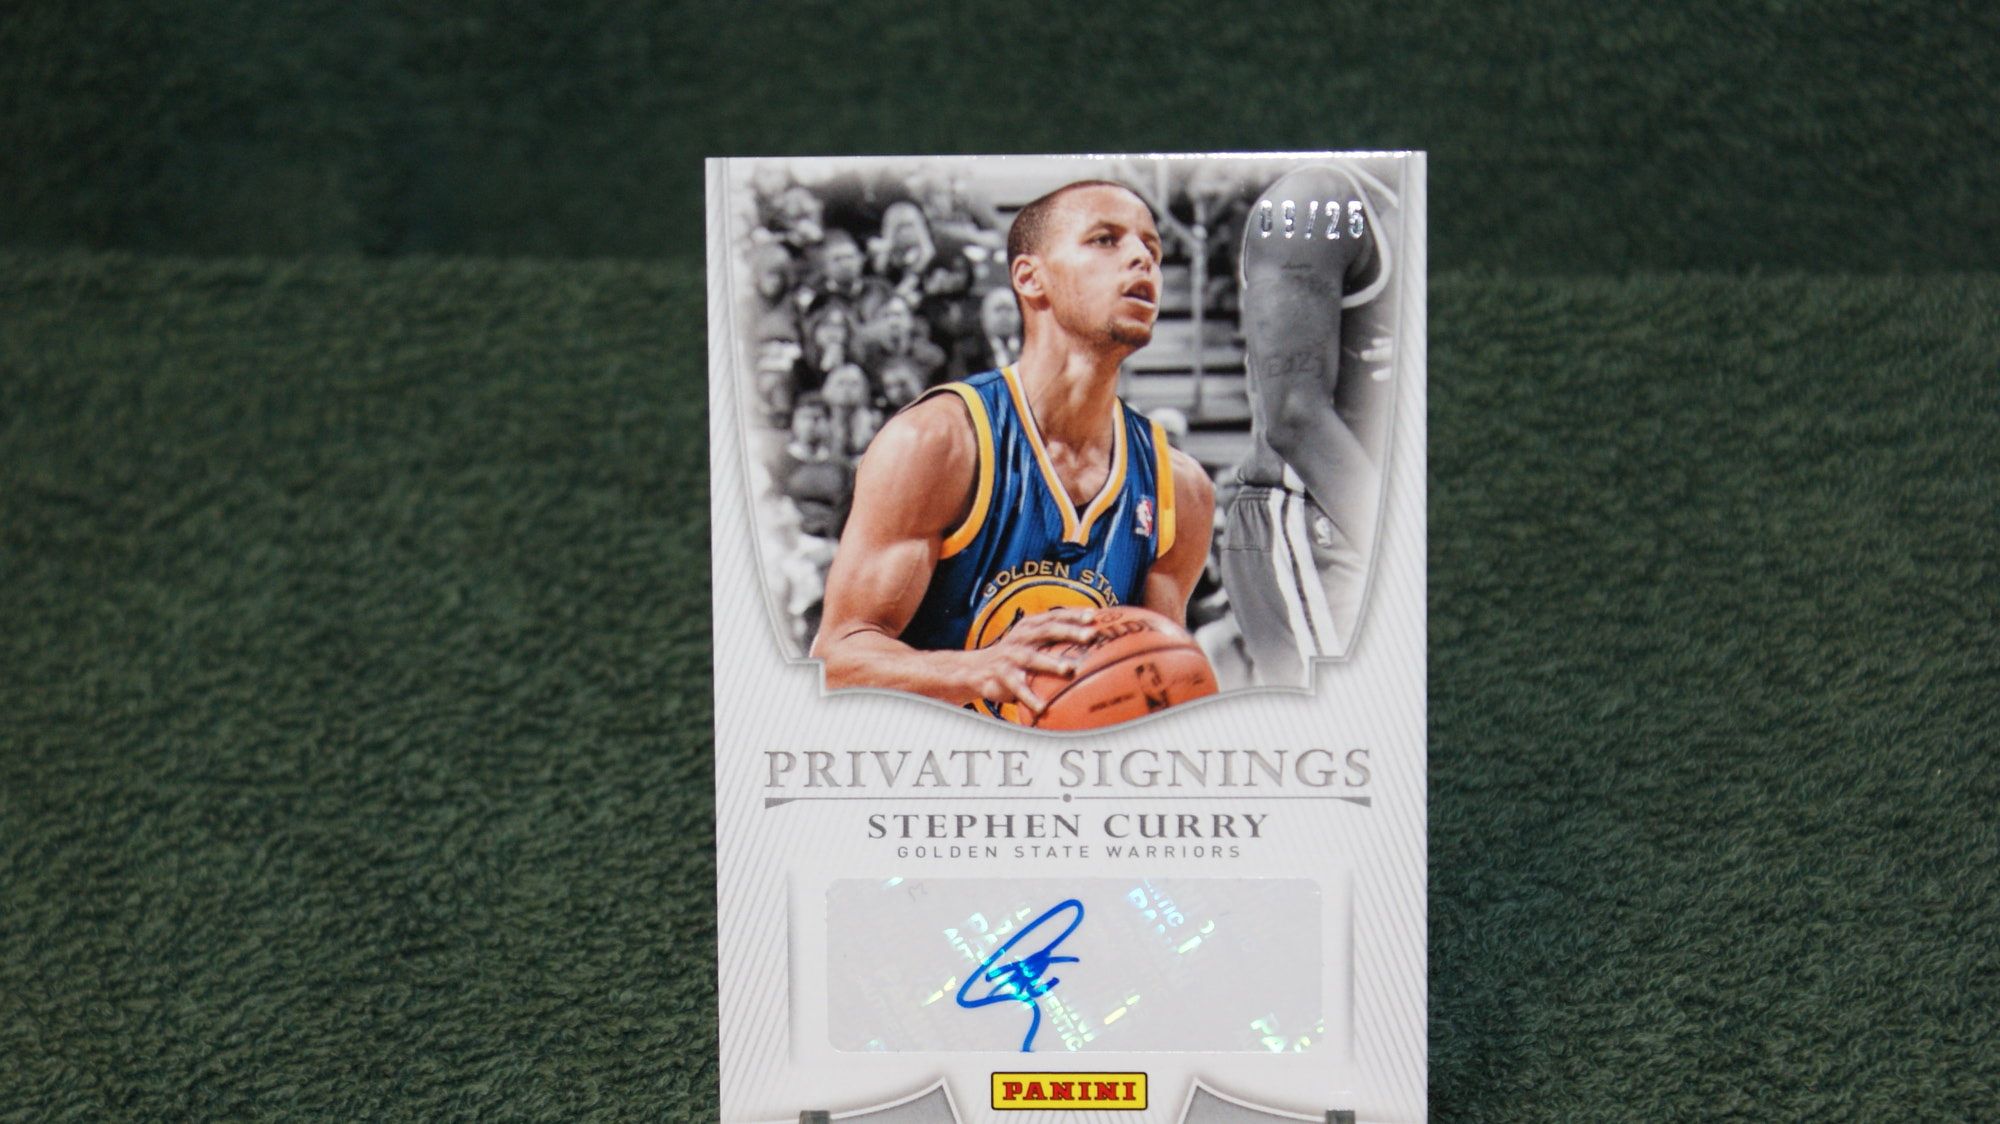 Stephen Curry Private Signings.JPG